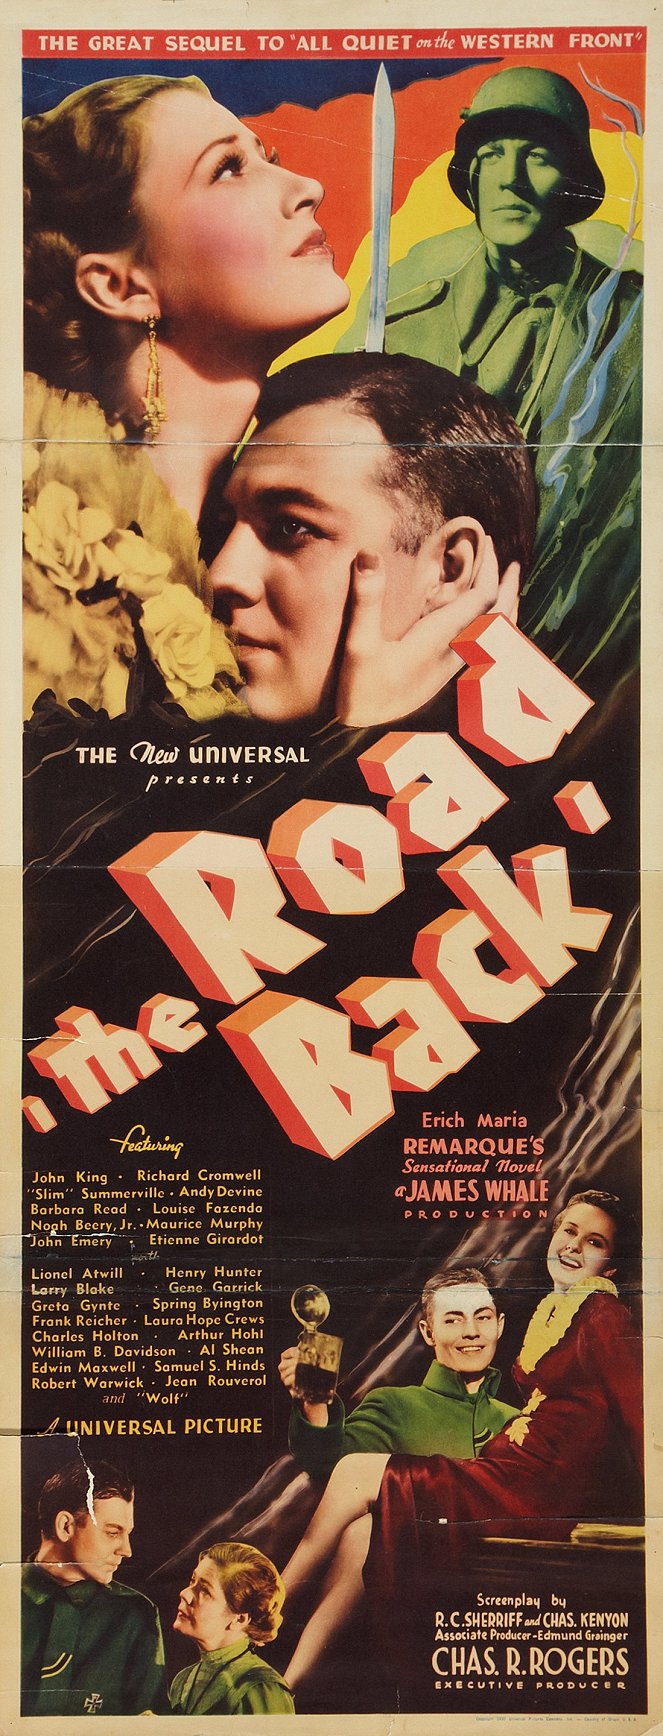 The Road Back - Posters